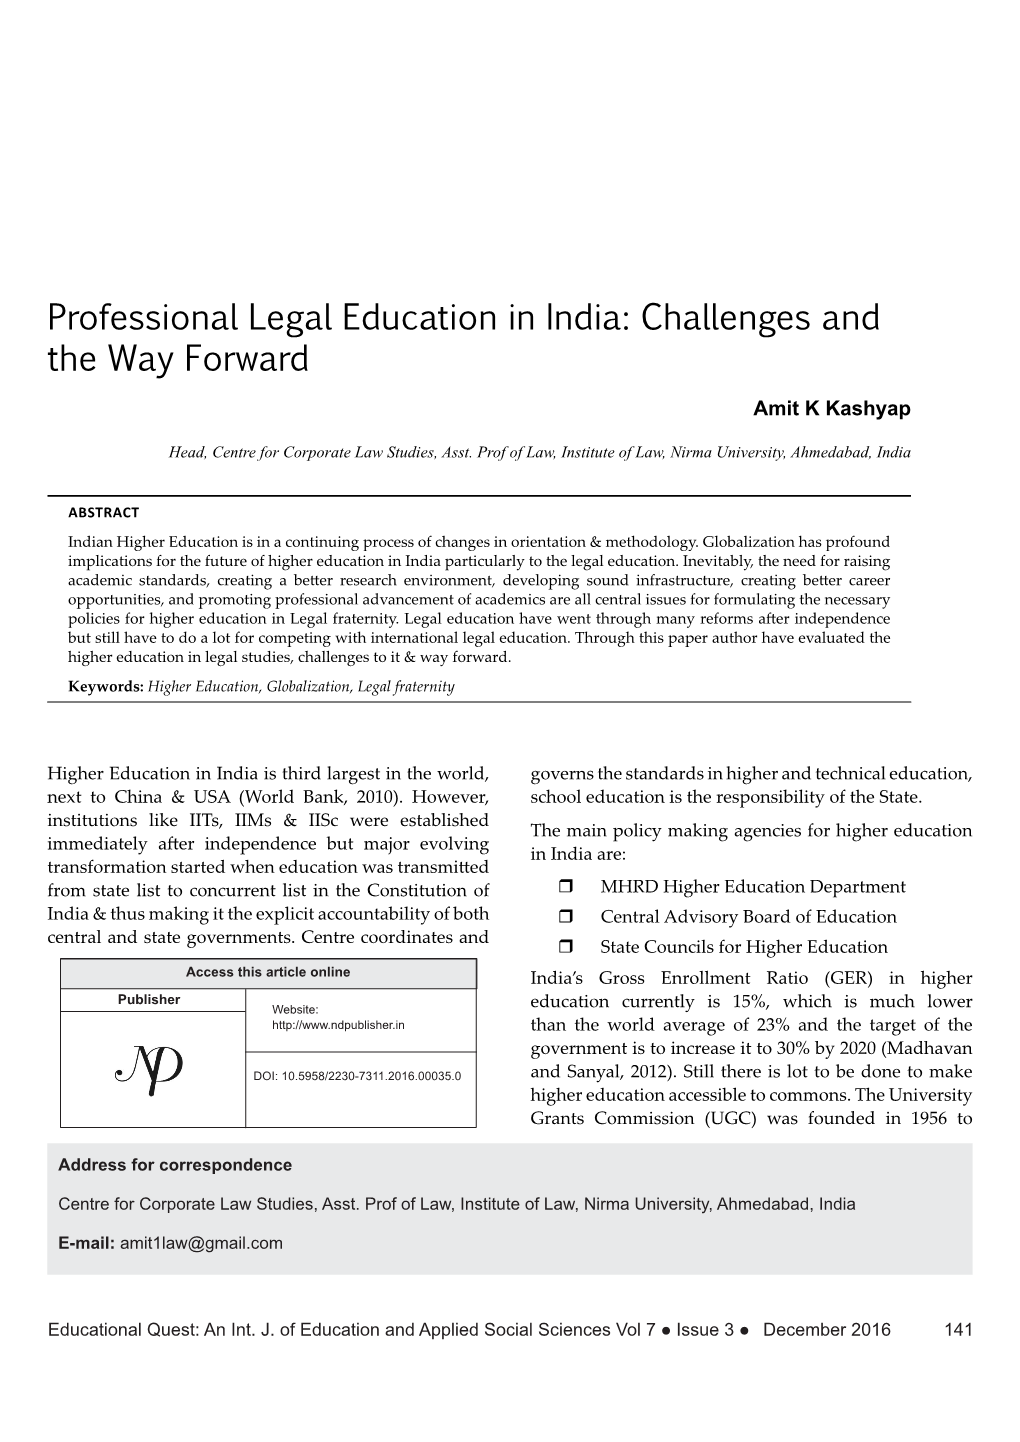 Professional Legal Education in India: Challenges and the Way Forward Amit K Kashyap